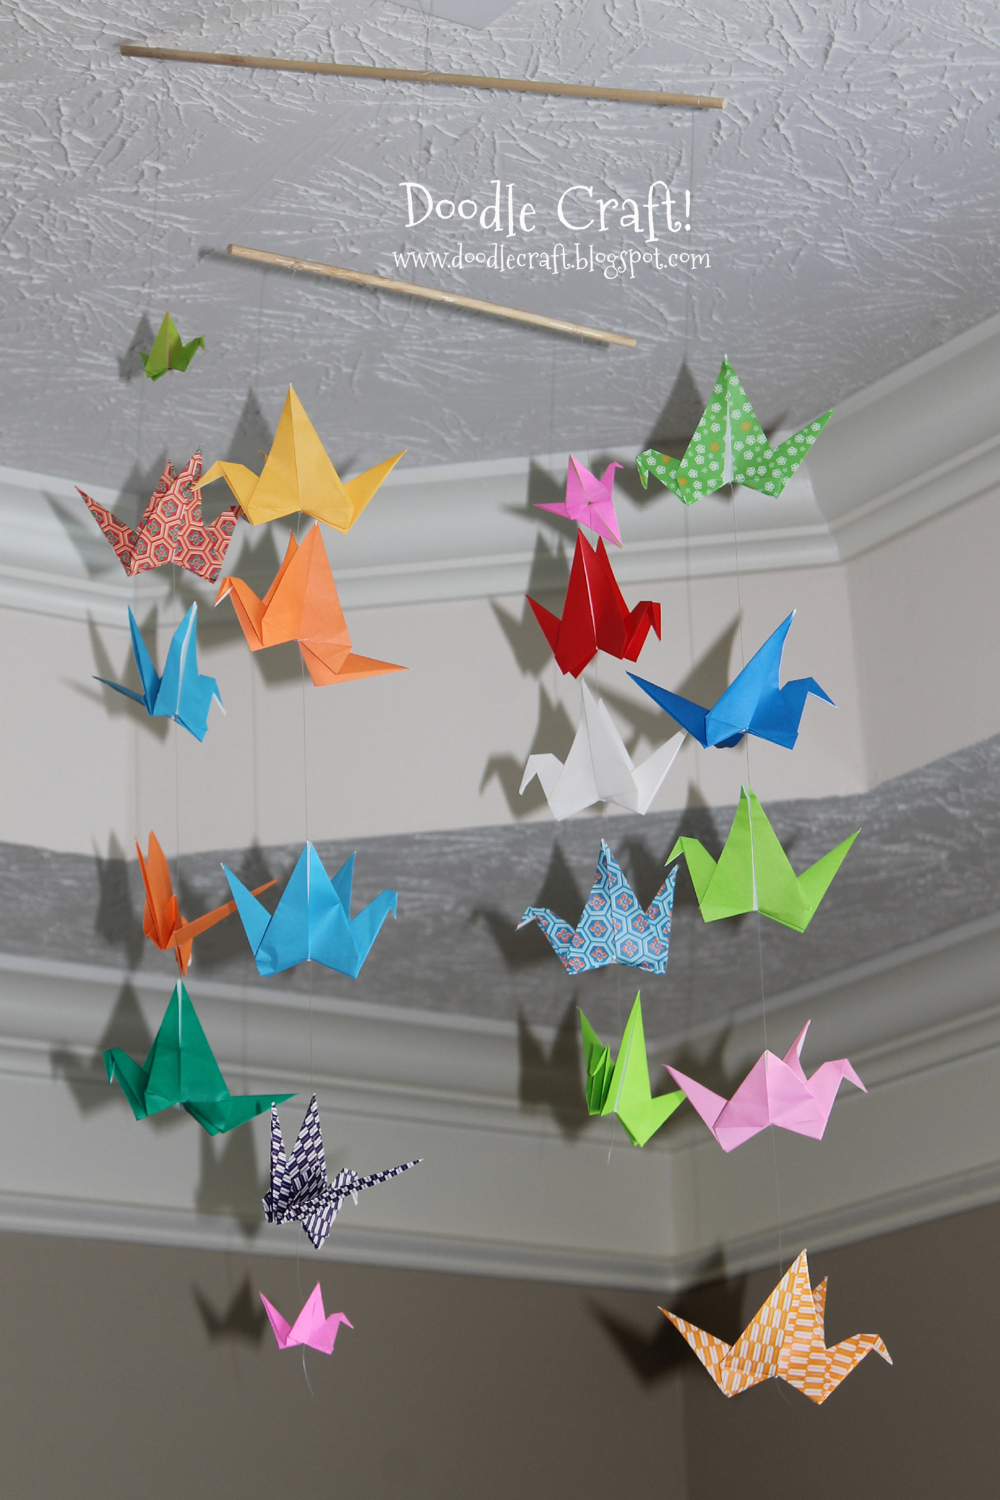 Origami Crane Flapping Origami Flapping Paper Crane Mobile